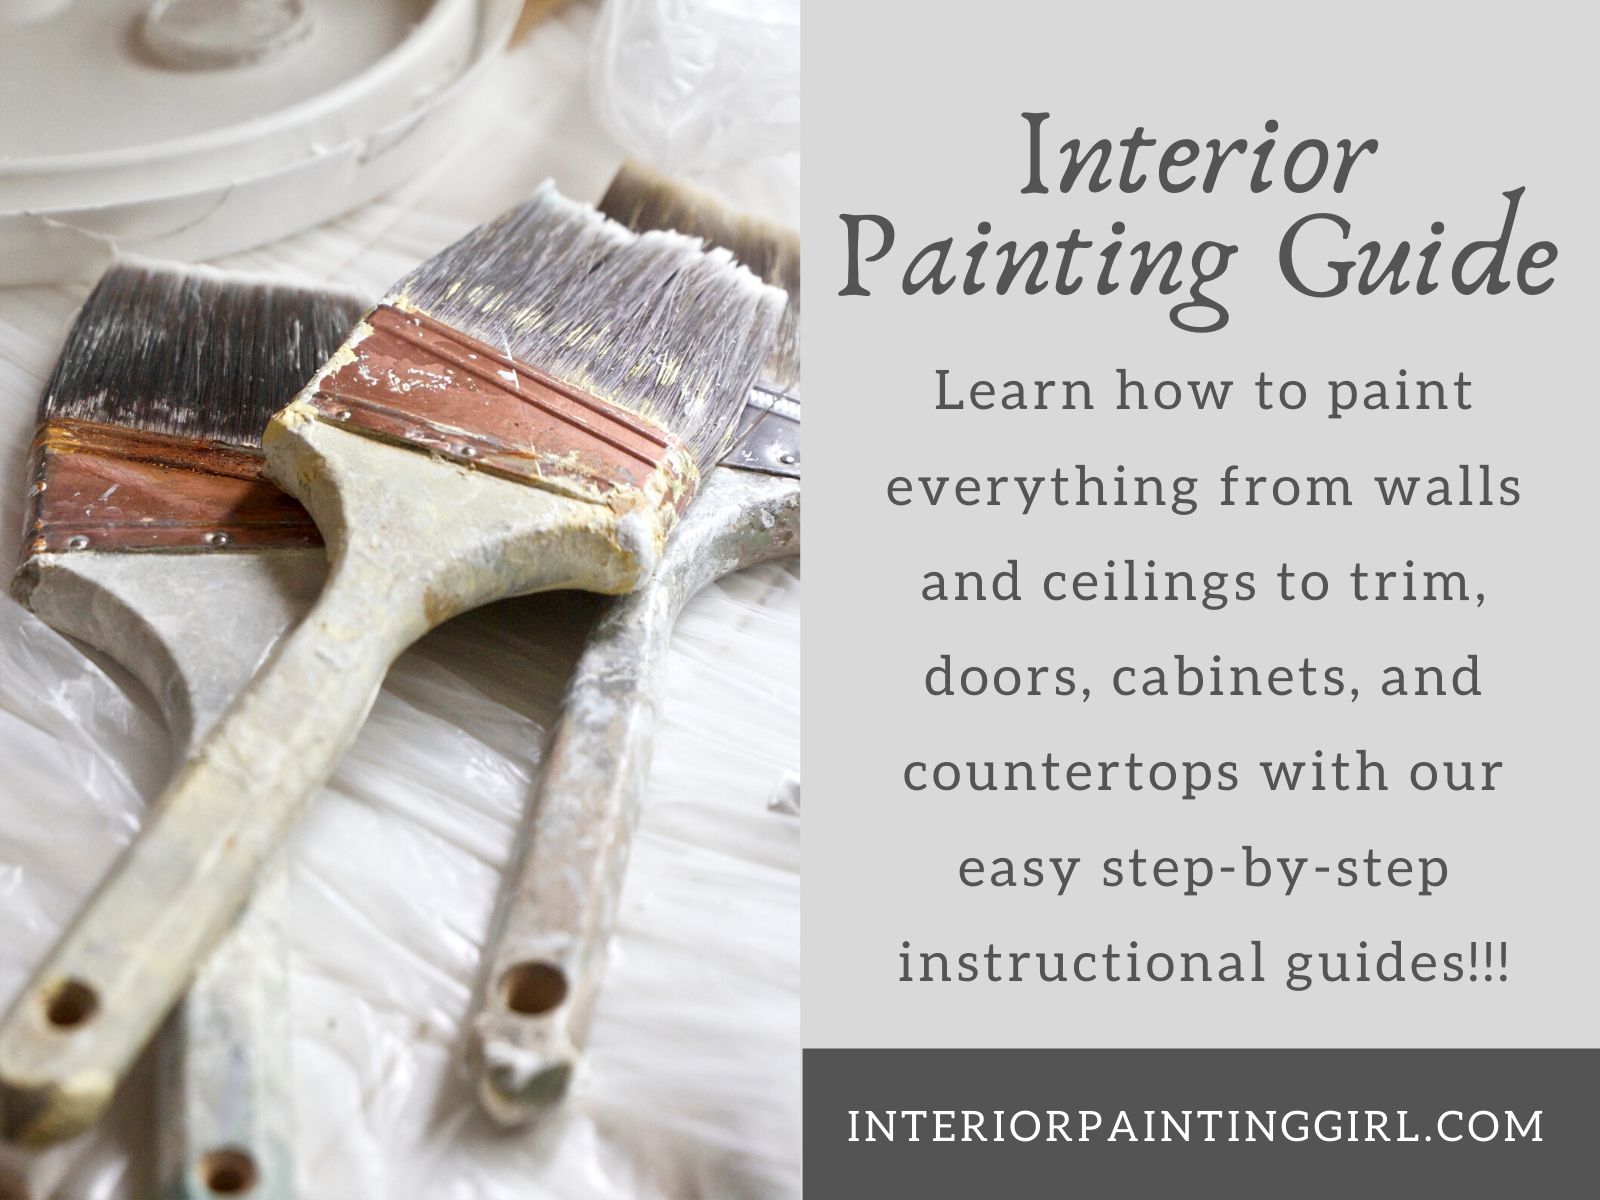 Learn from our step-by-step interior painting guides for everything from walls & ceilings to cabinets!